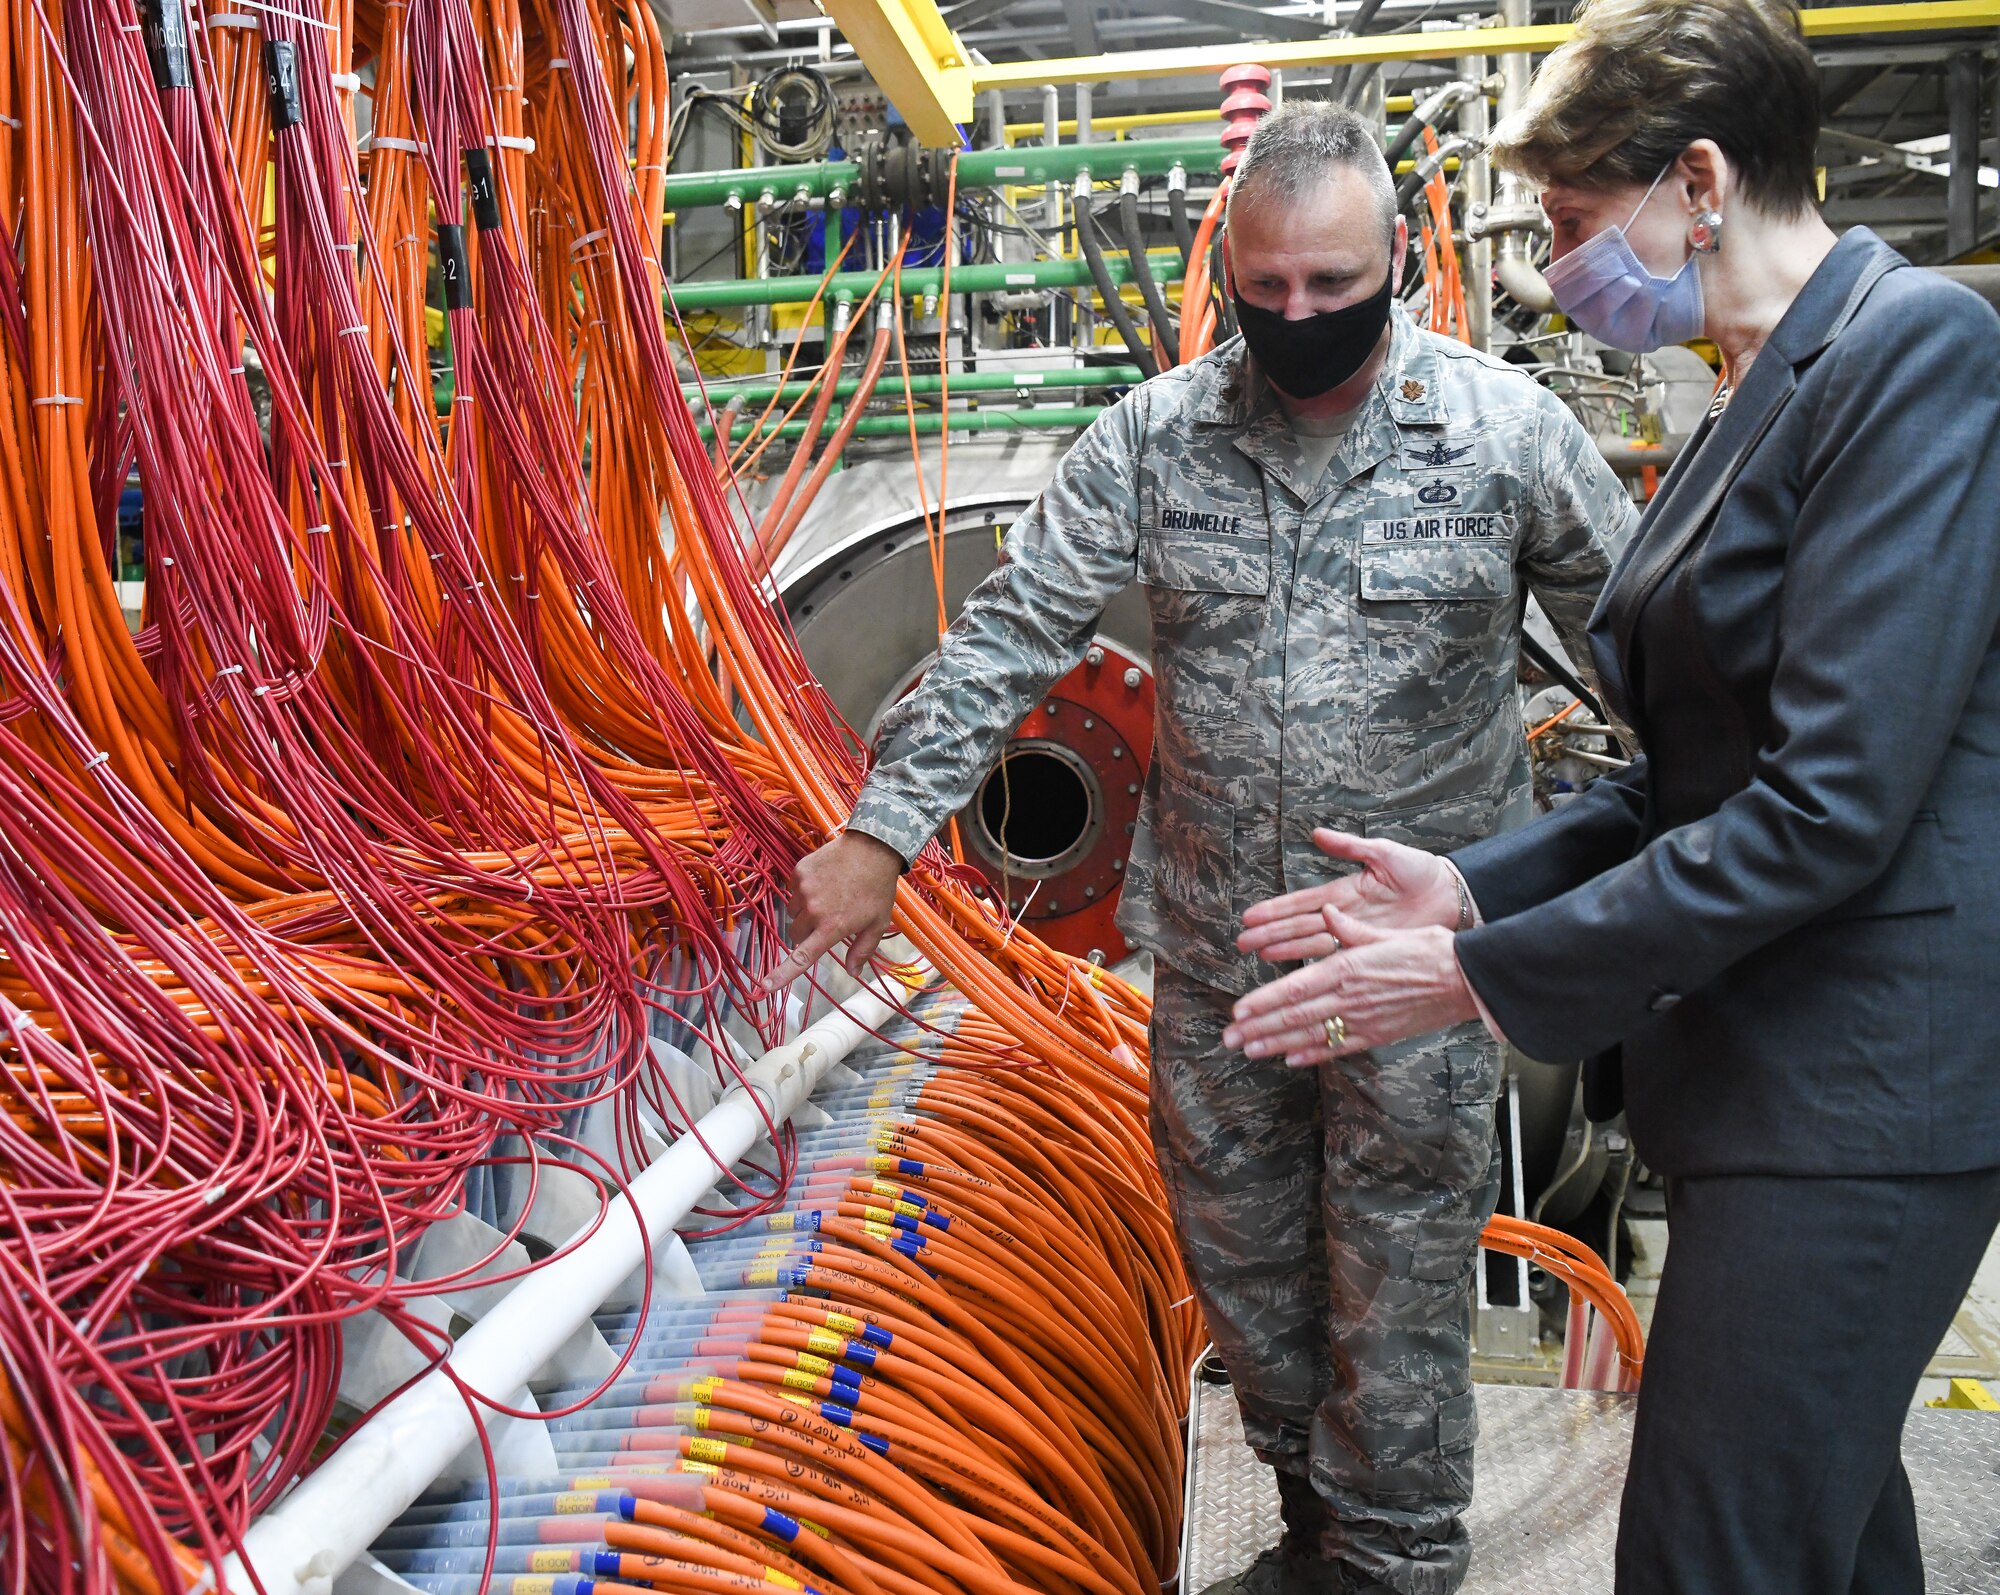 Maj. Christopher Brunelle, director of operations for the Arnold Engineering Development Complex Space and Missile Branch, explains the construction of an arc heater to Secretary of the Air Force Barbara Barrett during her visit, June 18, 2020, to Arnold Air Force Base, Tenn. Arc heaters provide high-enthalpy test environments to test materials and other means of thermal protection. (U.S. Air Force photos by Jill Pickett)